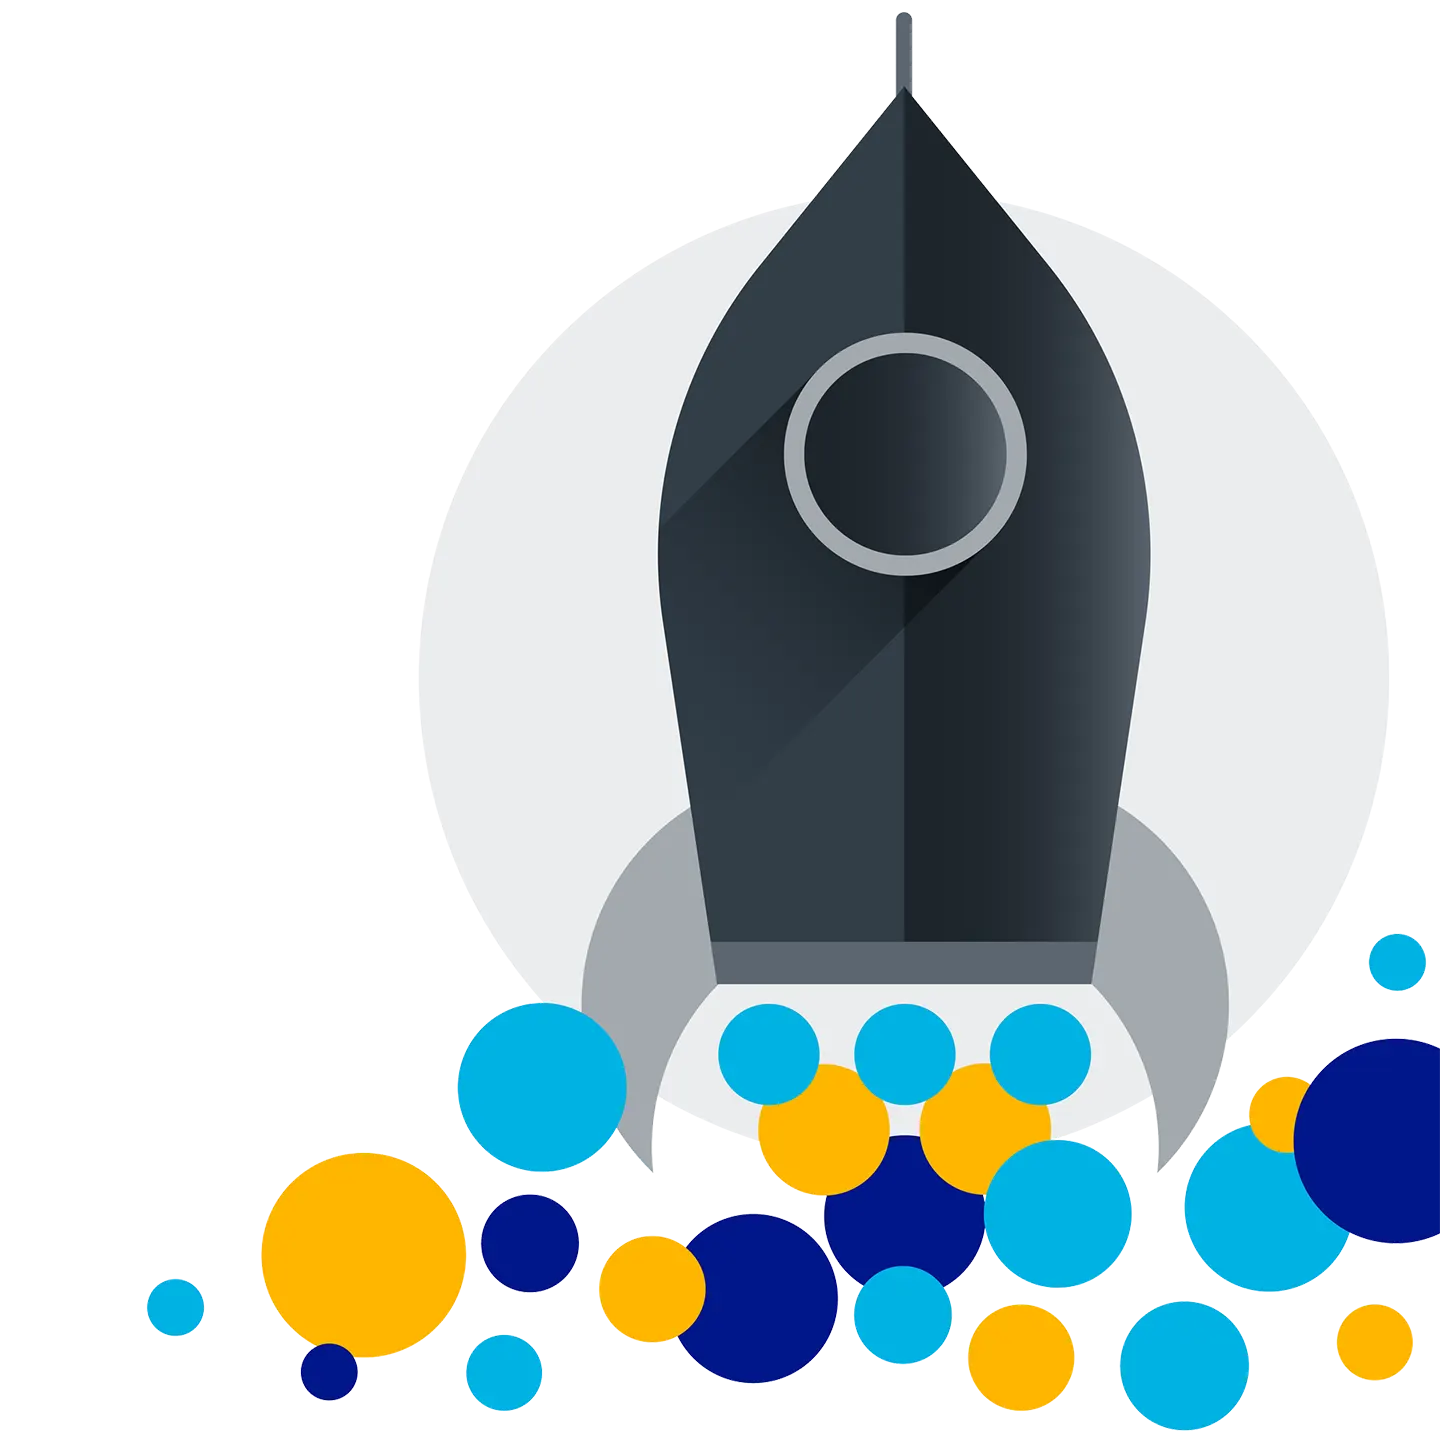 Graphic of a rocket ship representing our mission